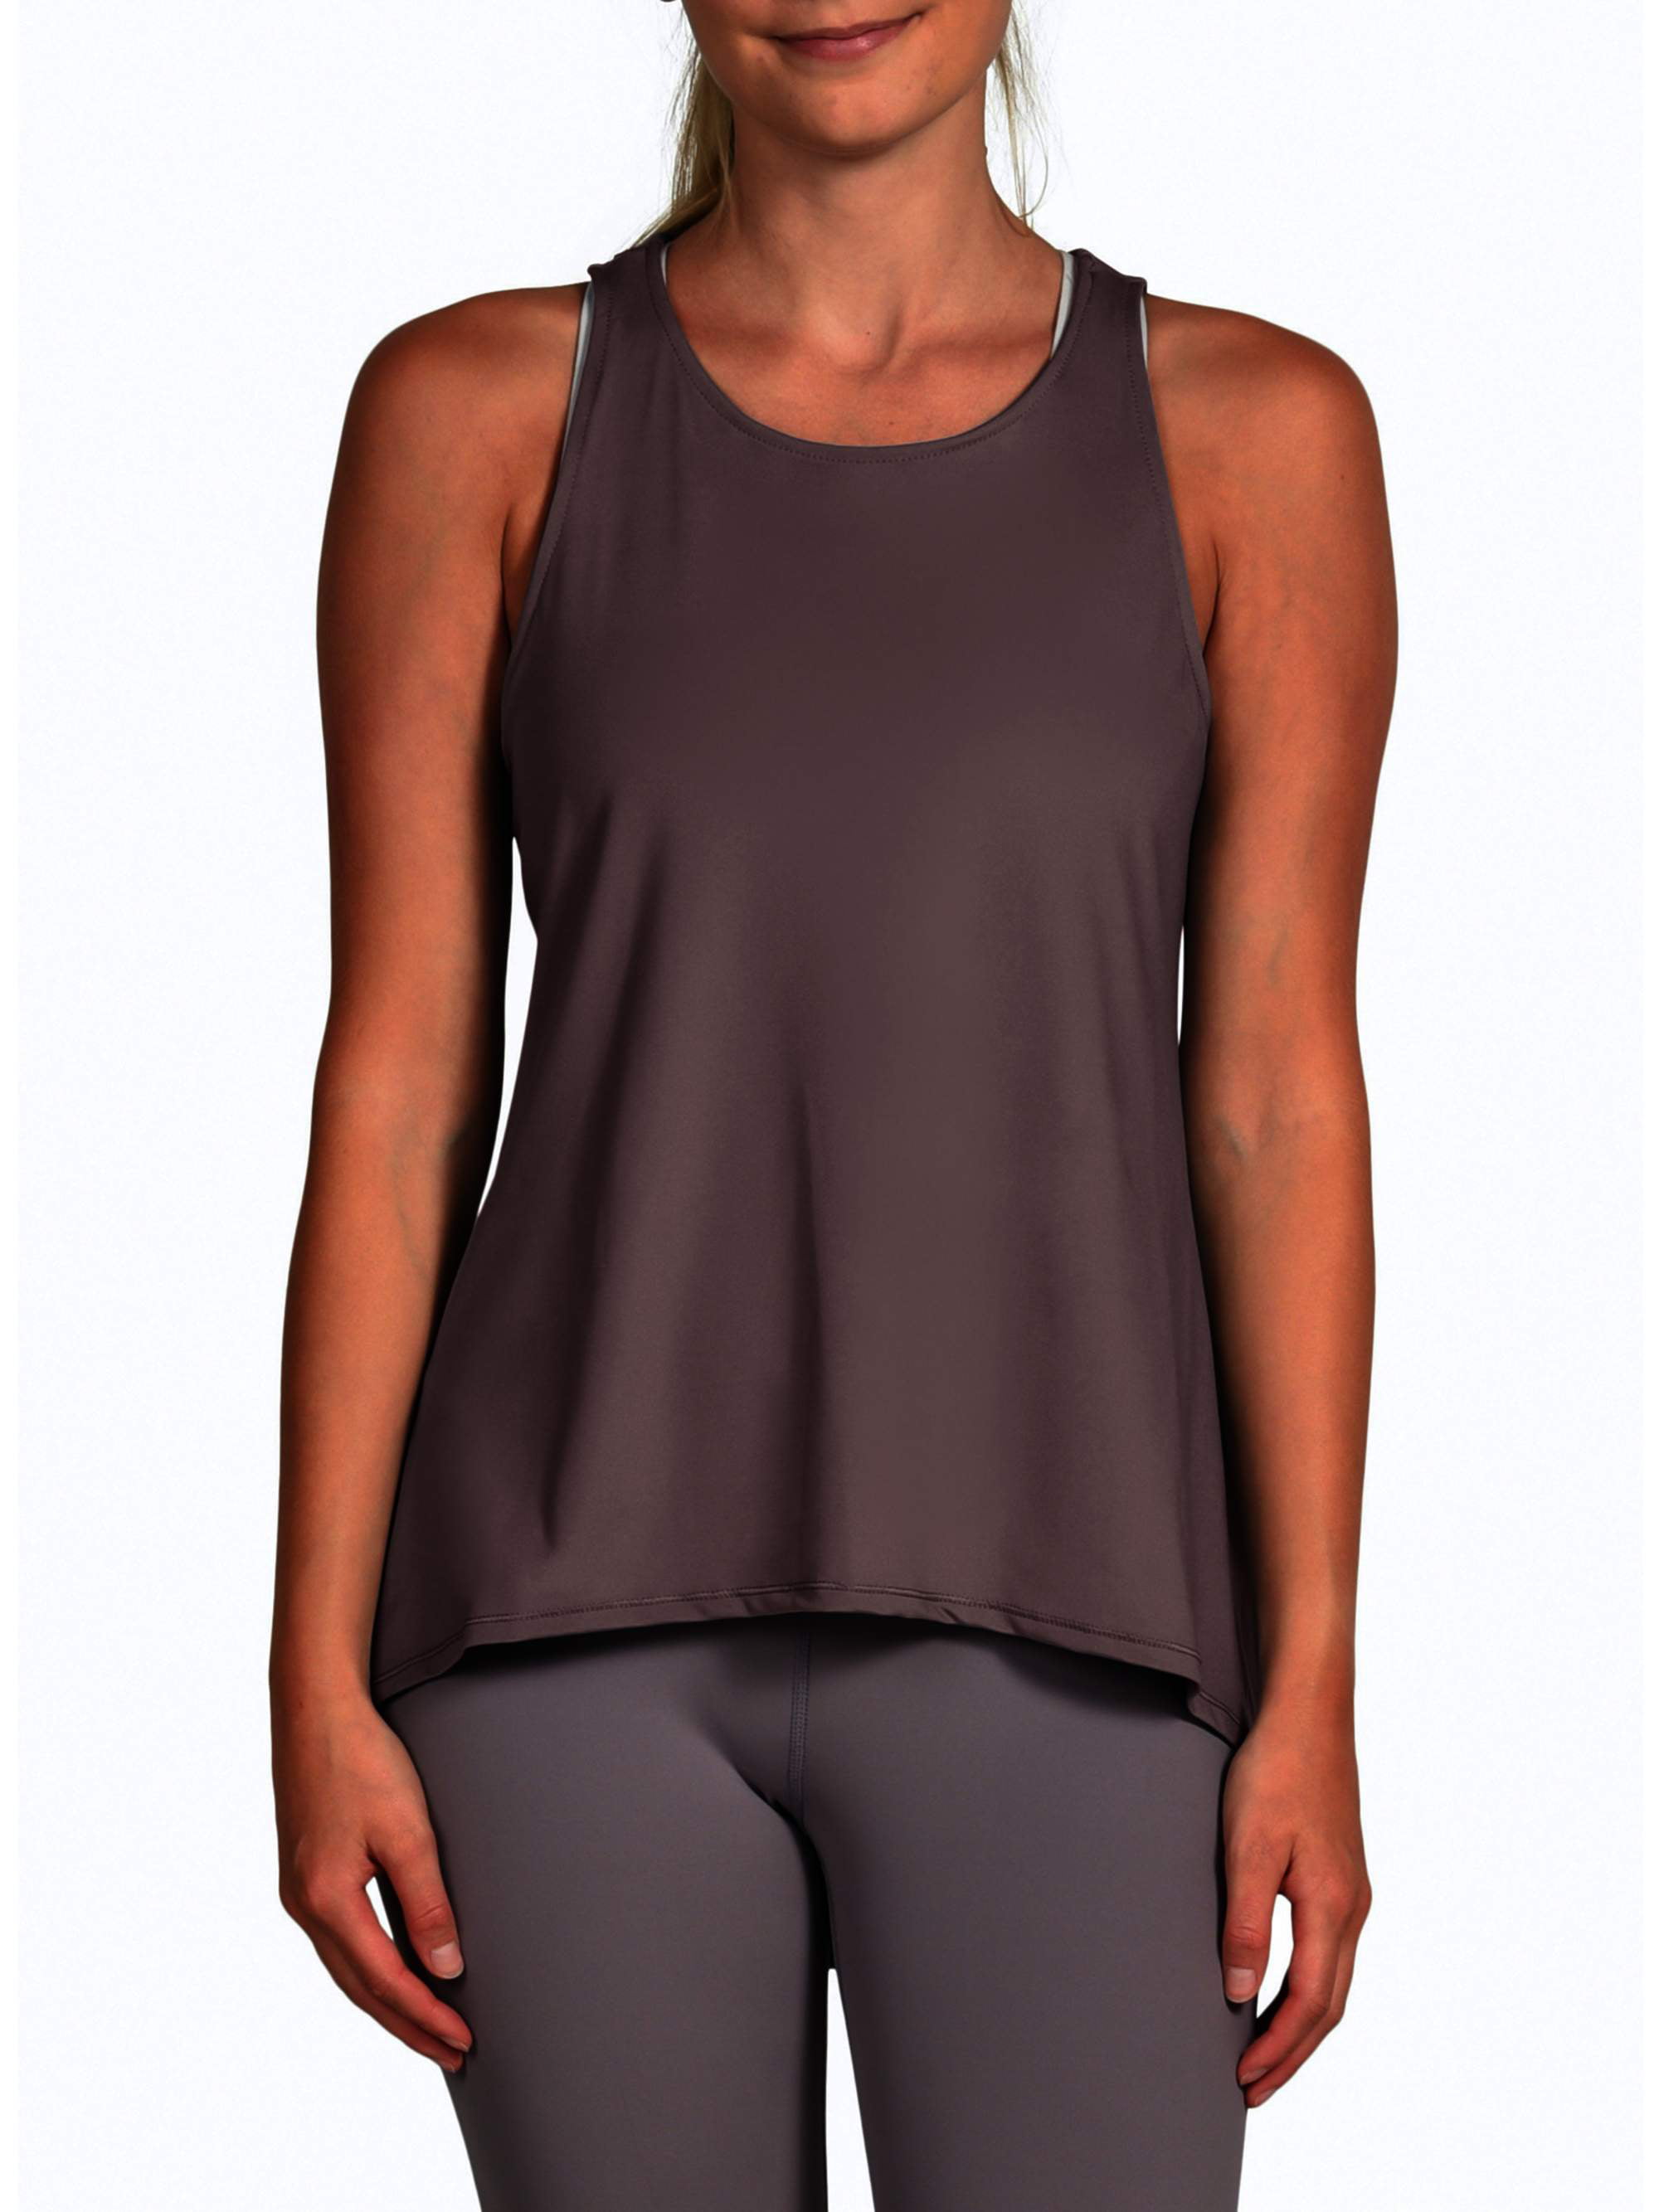 Yogalicious Ultra Soft Lightweight Camisole Tank Top with Built-in